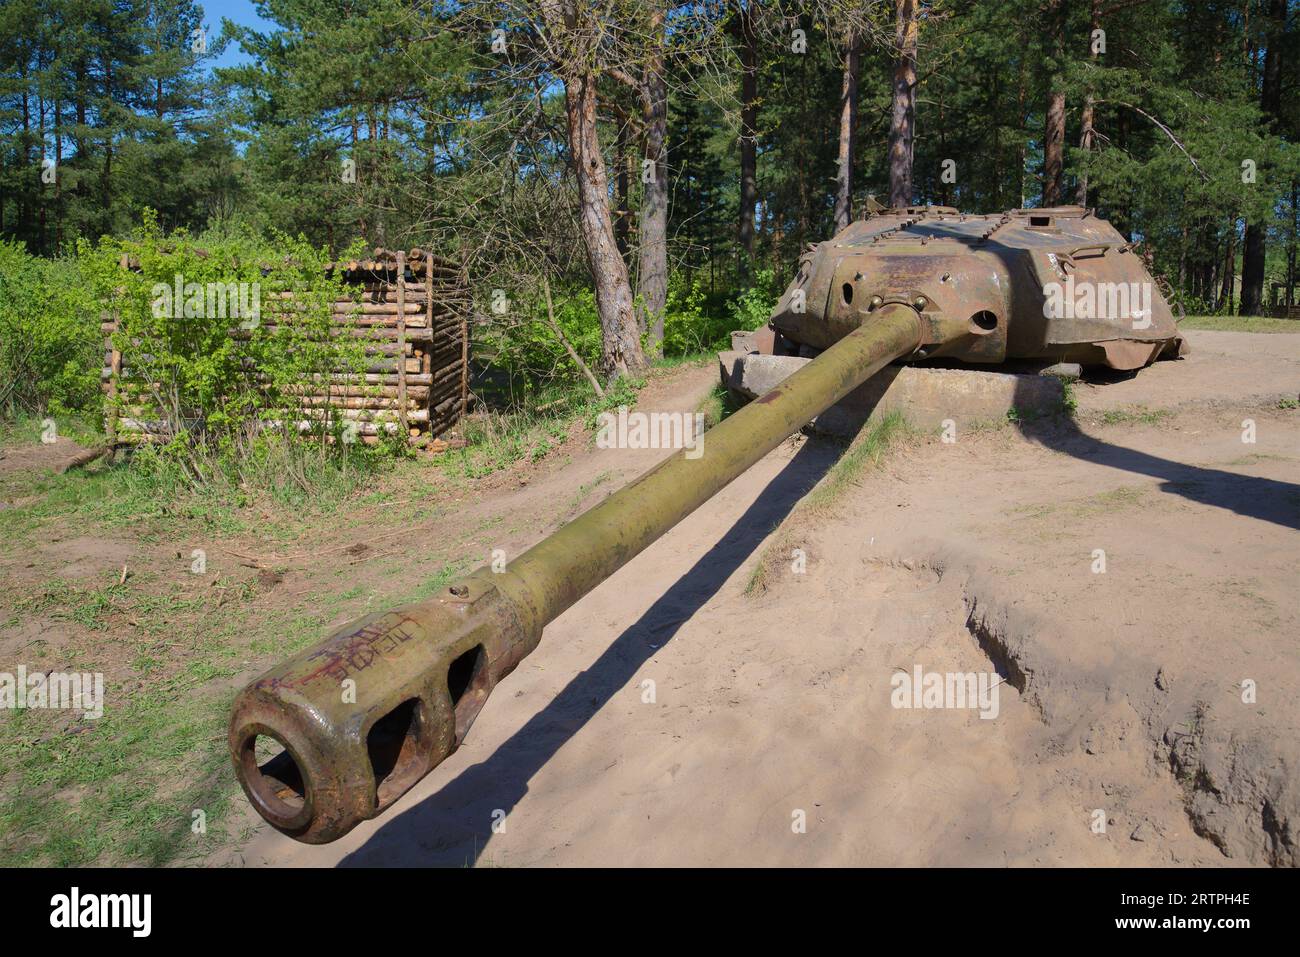 The old AFDS turret artillery installation based on the IS-4 tank turret on a sunny May day. Sestroretsk Frontier, Russia Stock Photo